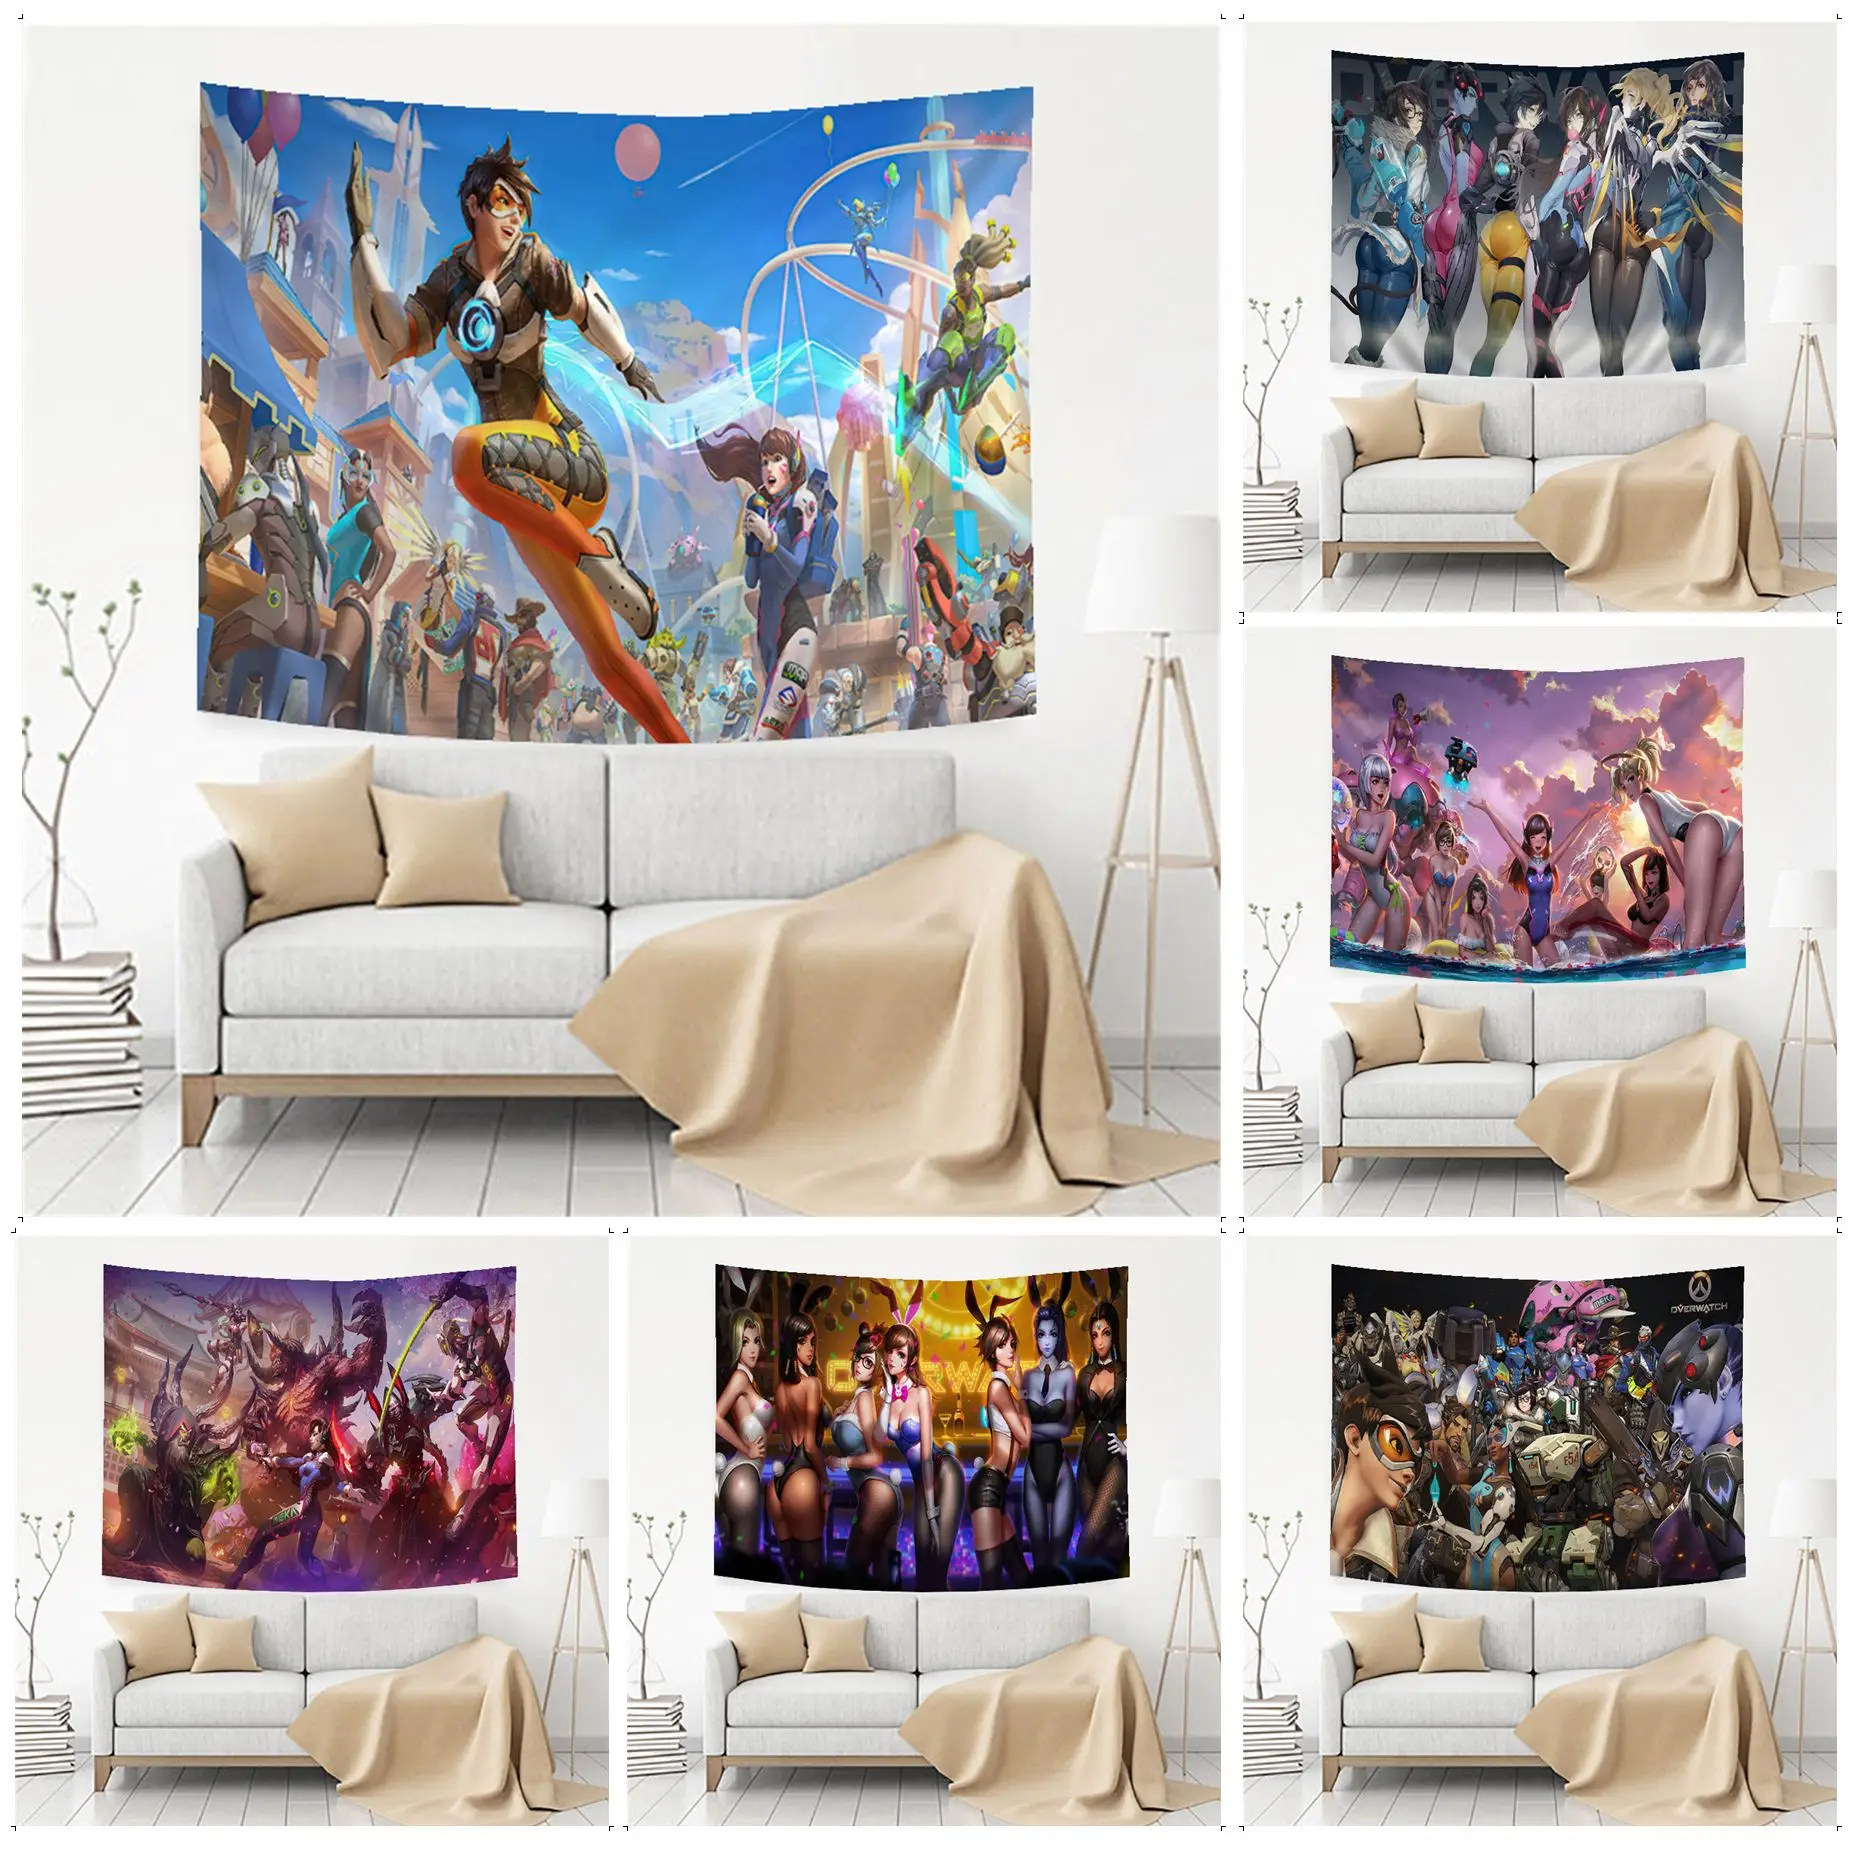 

Bandai Overwatch Tapestry Art Printing Indian Buddha Wall Decoration Witchcraft Bohemian Hippie Decor Blanket